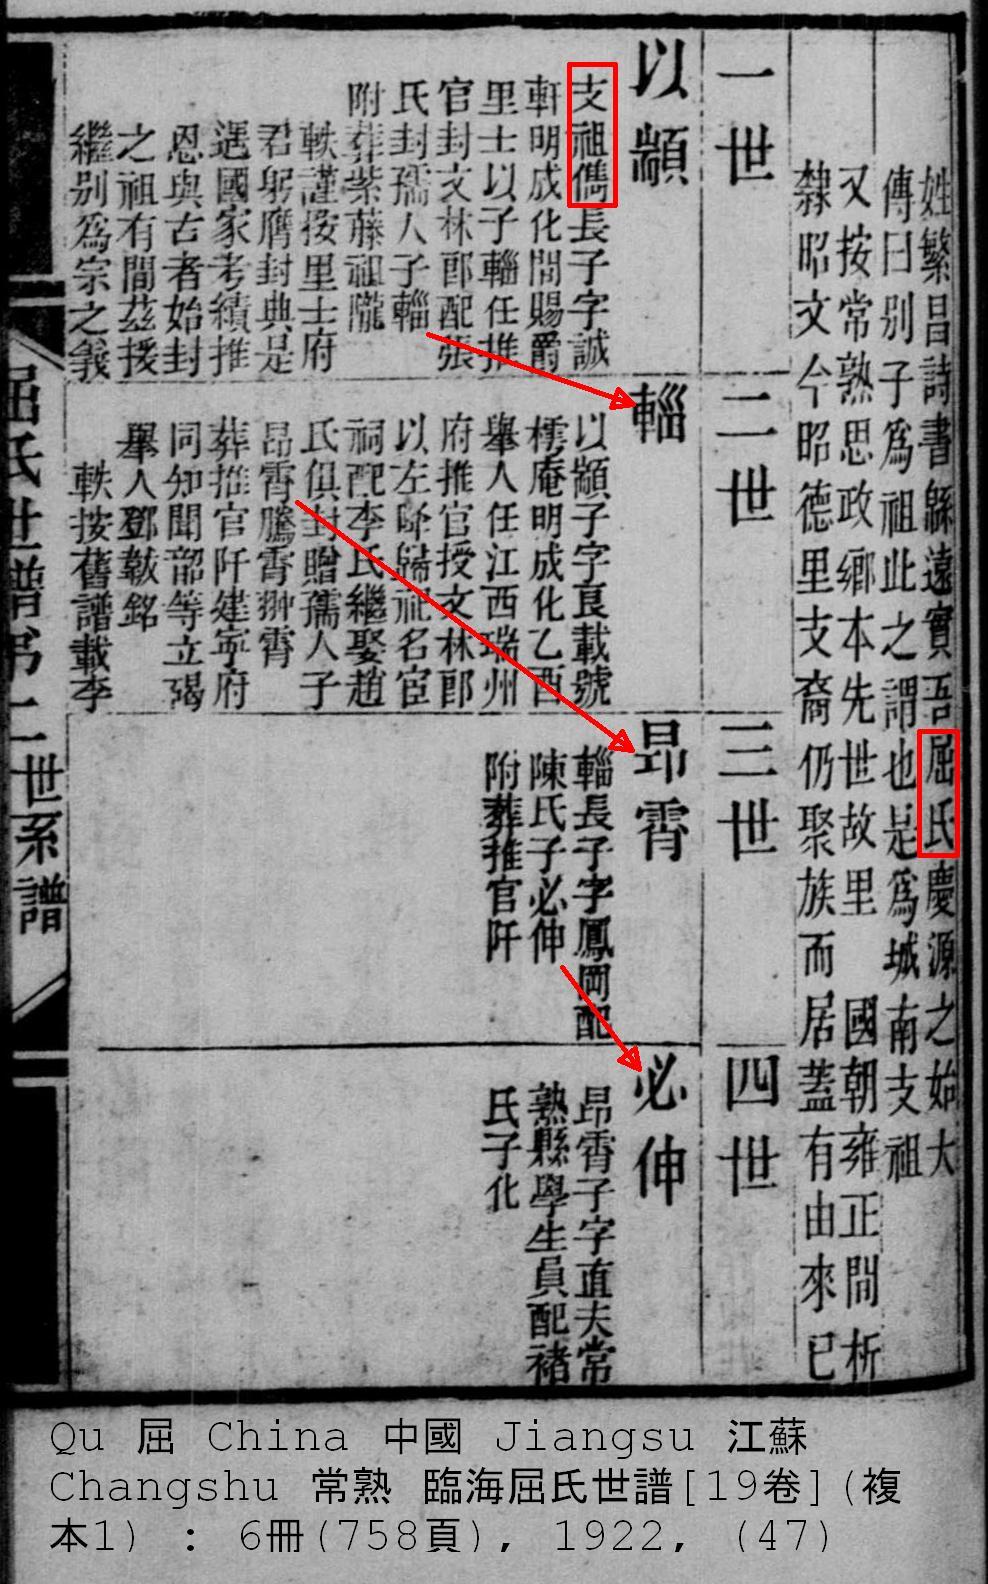 7. This is a Qu family branch Generation table starting with the first descendant Yi zhuan (son of Jun 儁 handsome, of outstanding talent) who lived during the Chenghua period (1465-1488) of the Ming